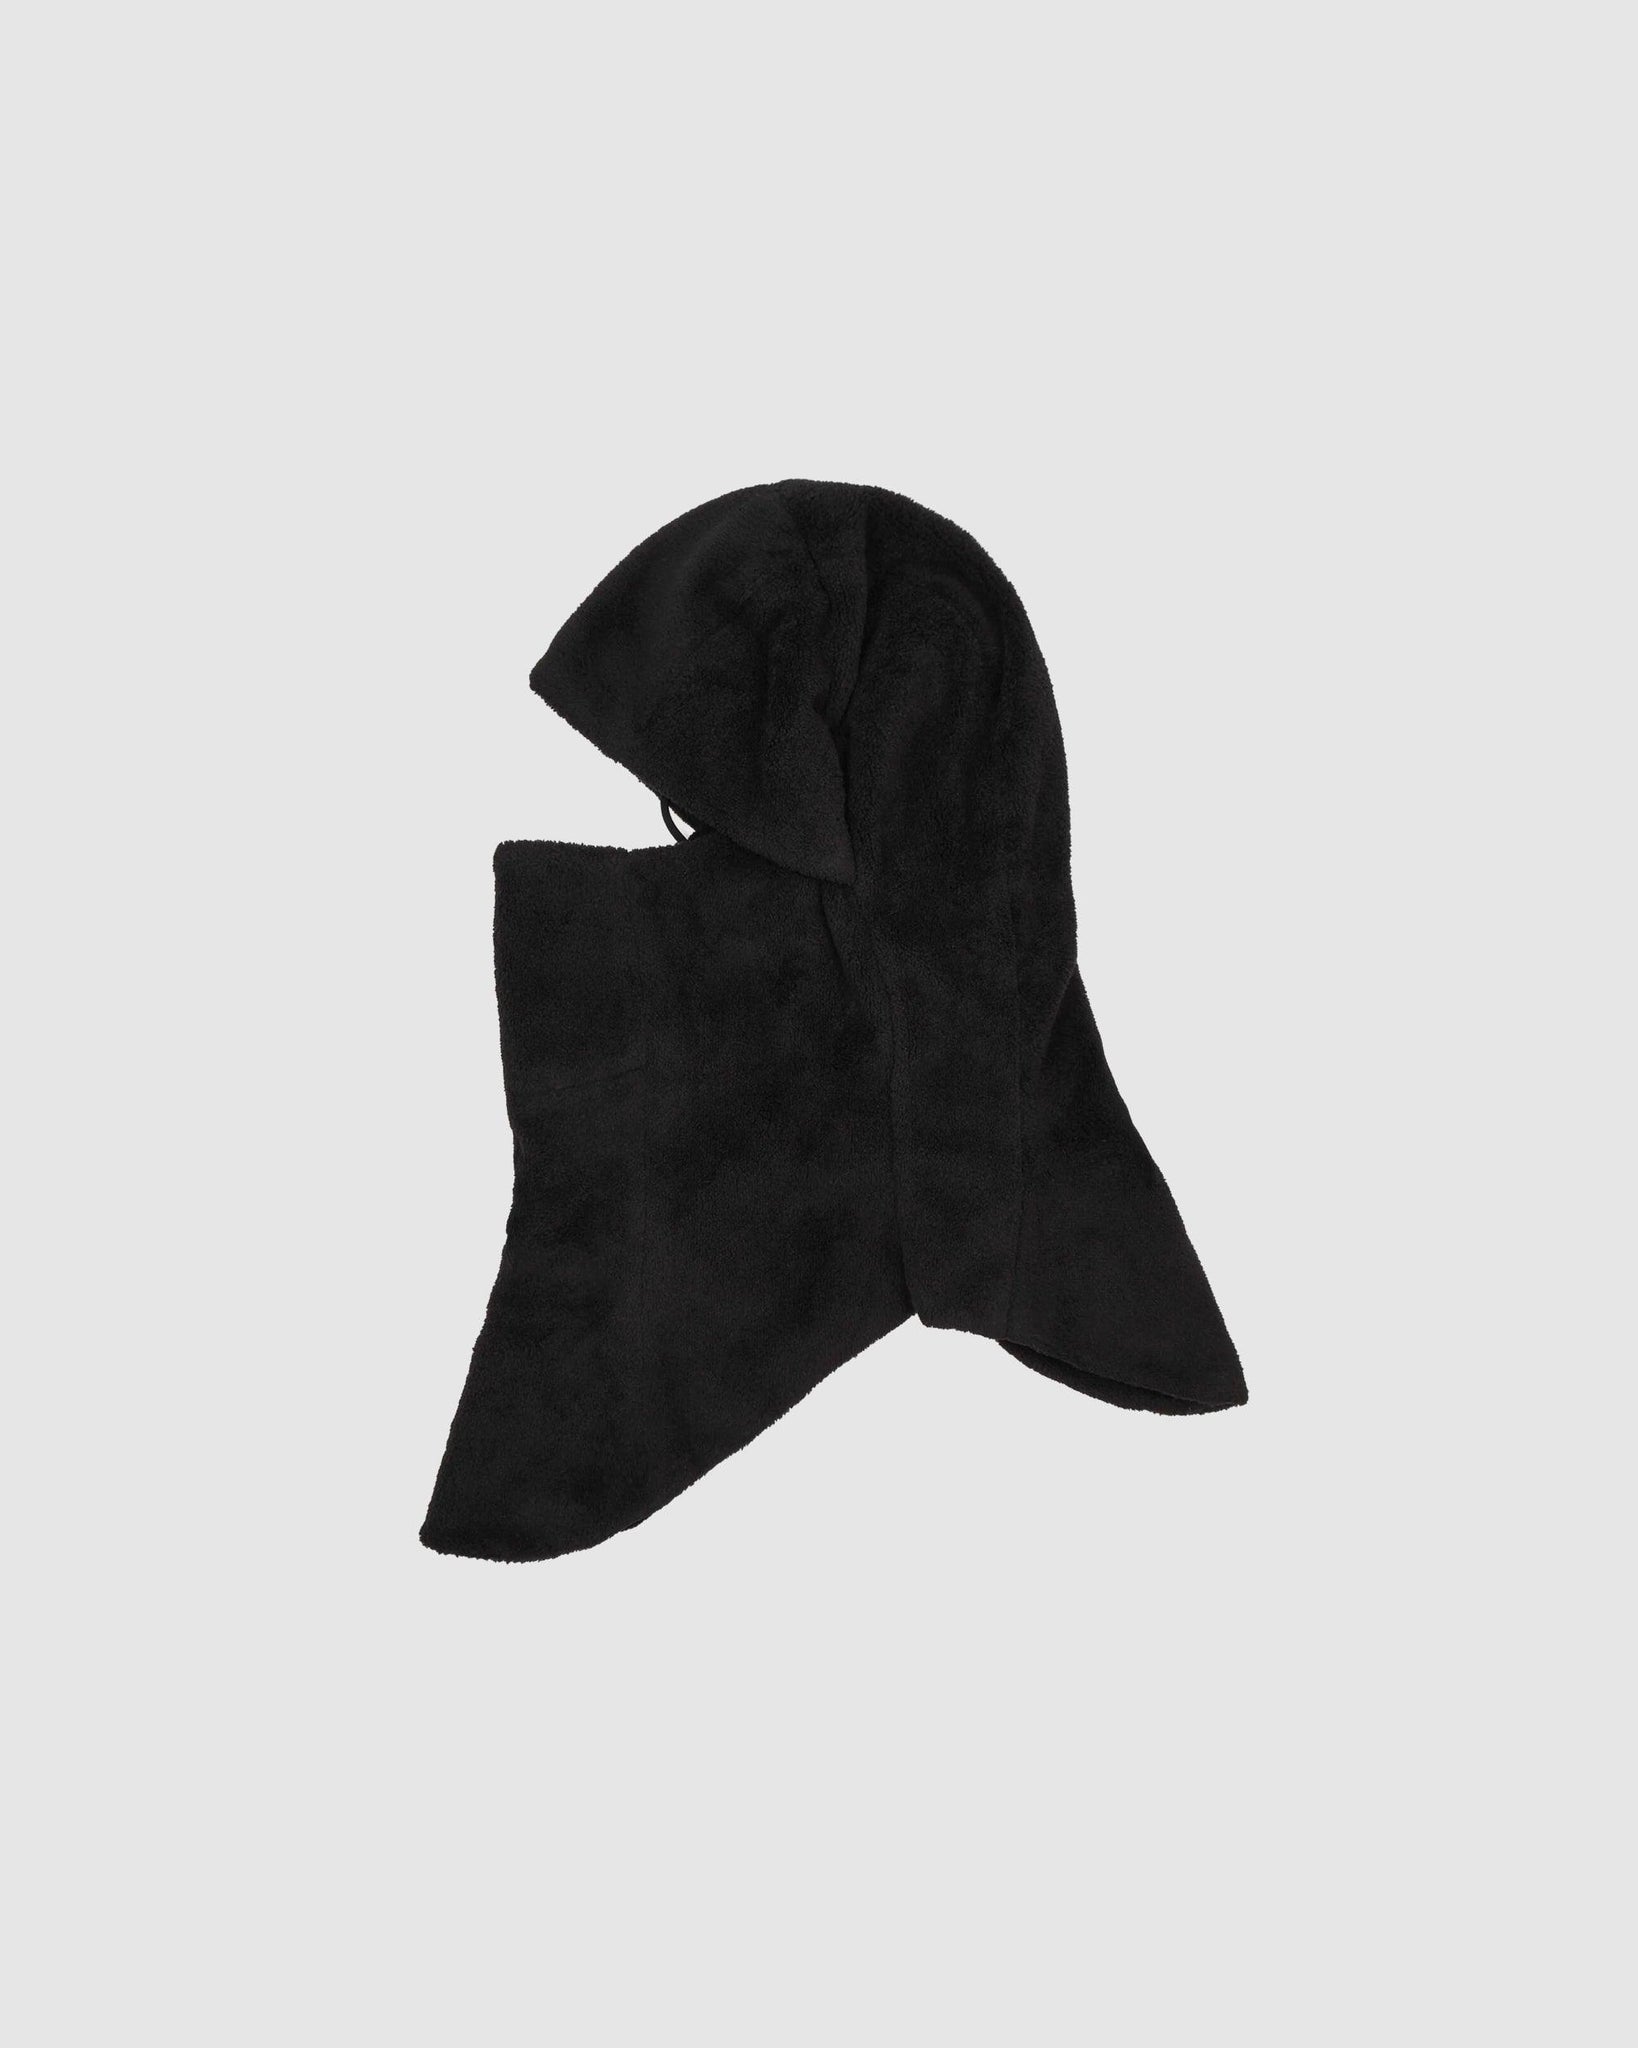 5.1 Balaclava Right Black - {{ collection.title }} - Chinatown Country Club 